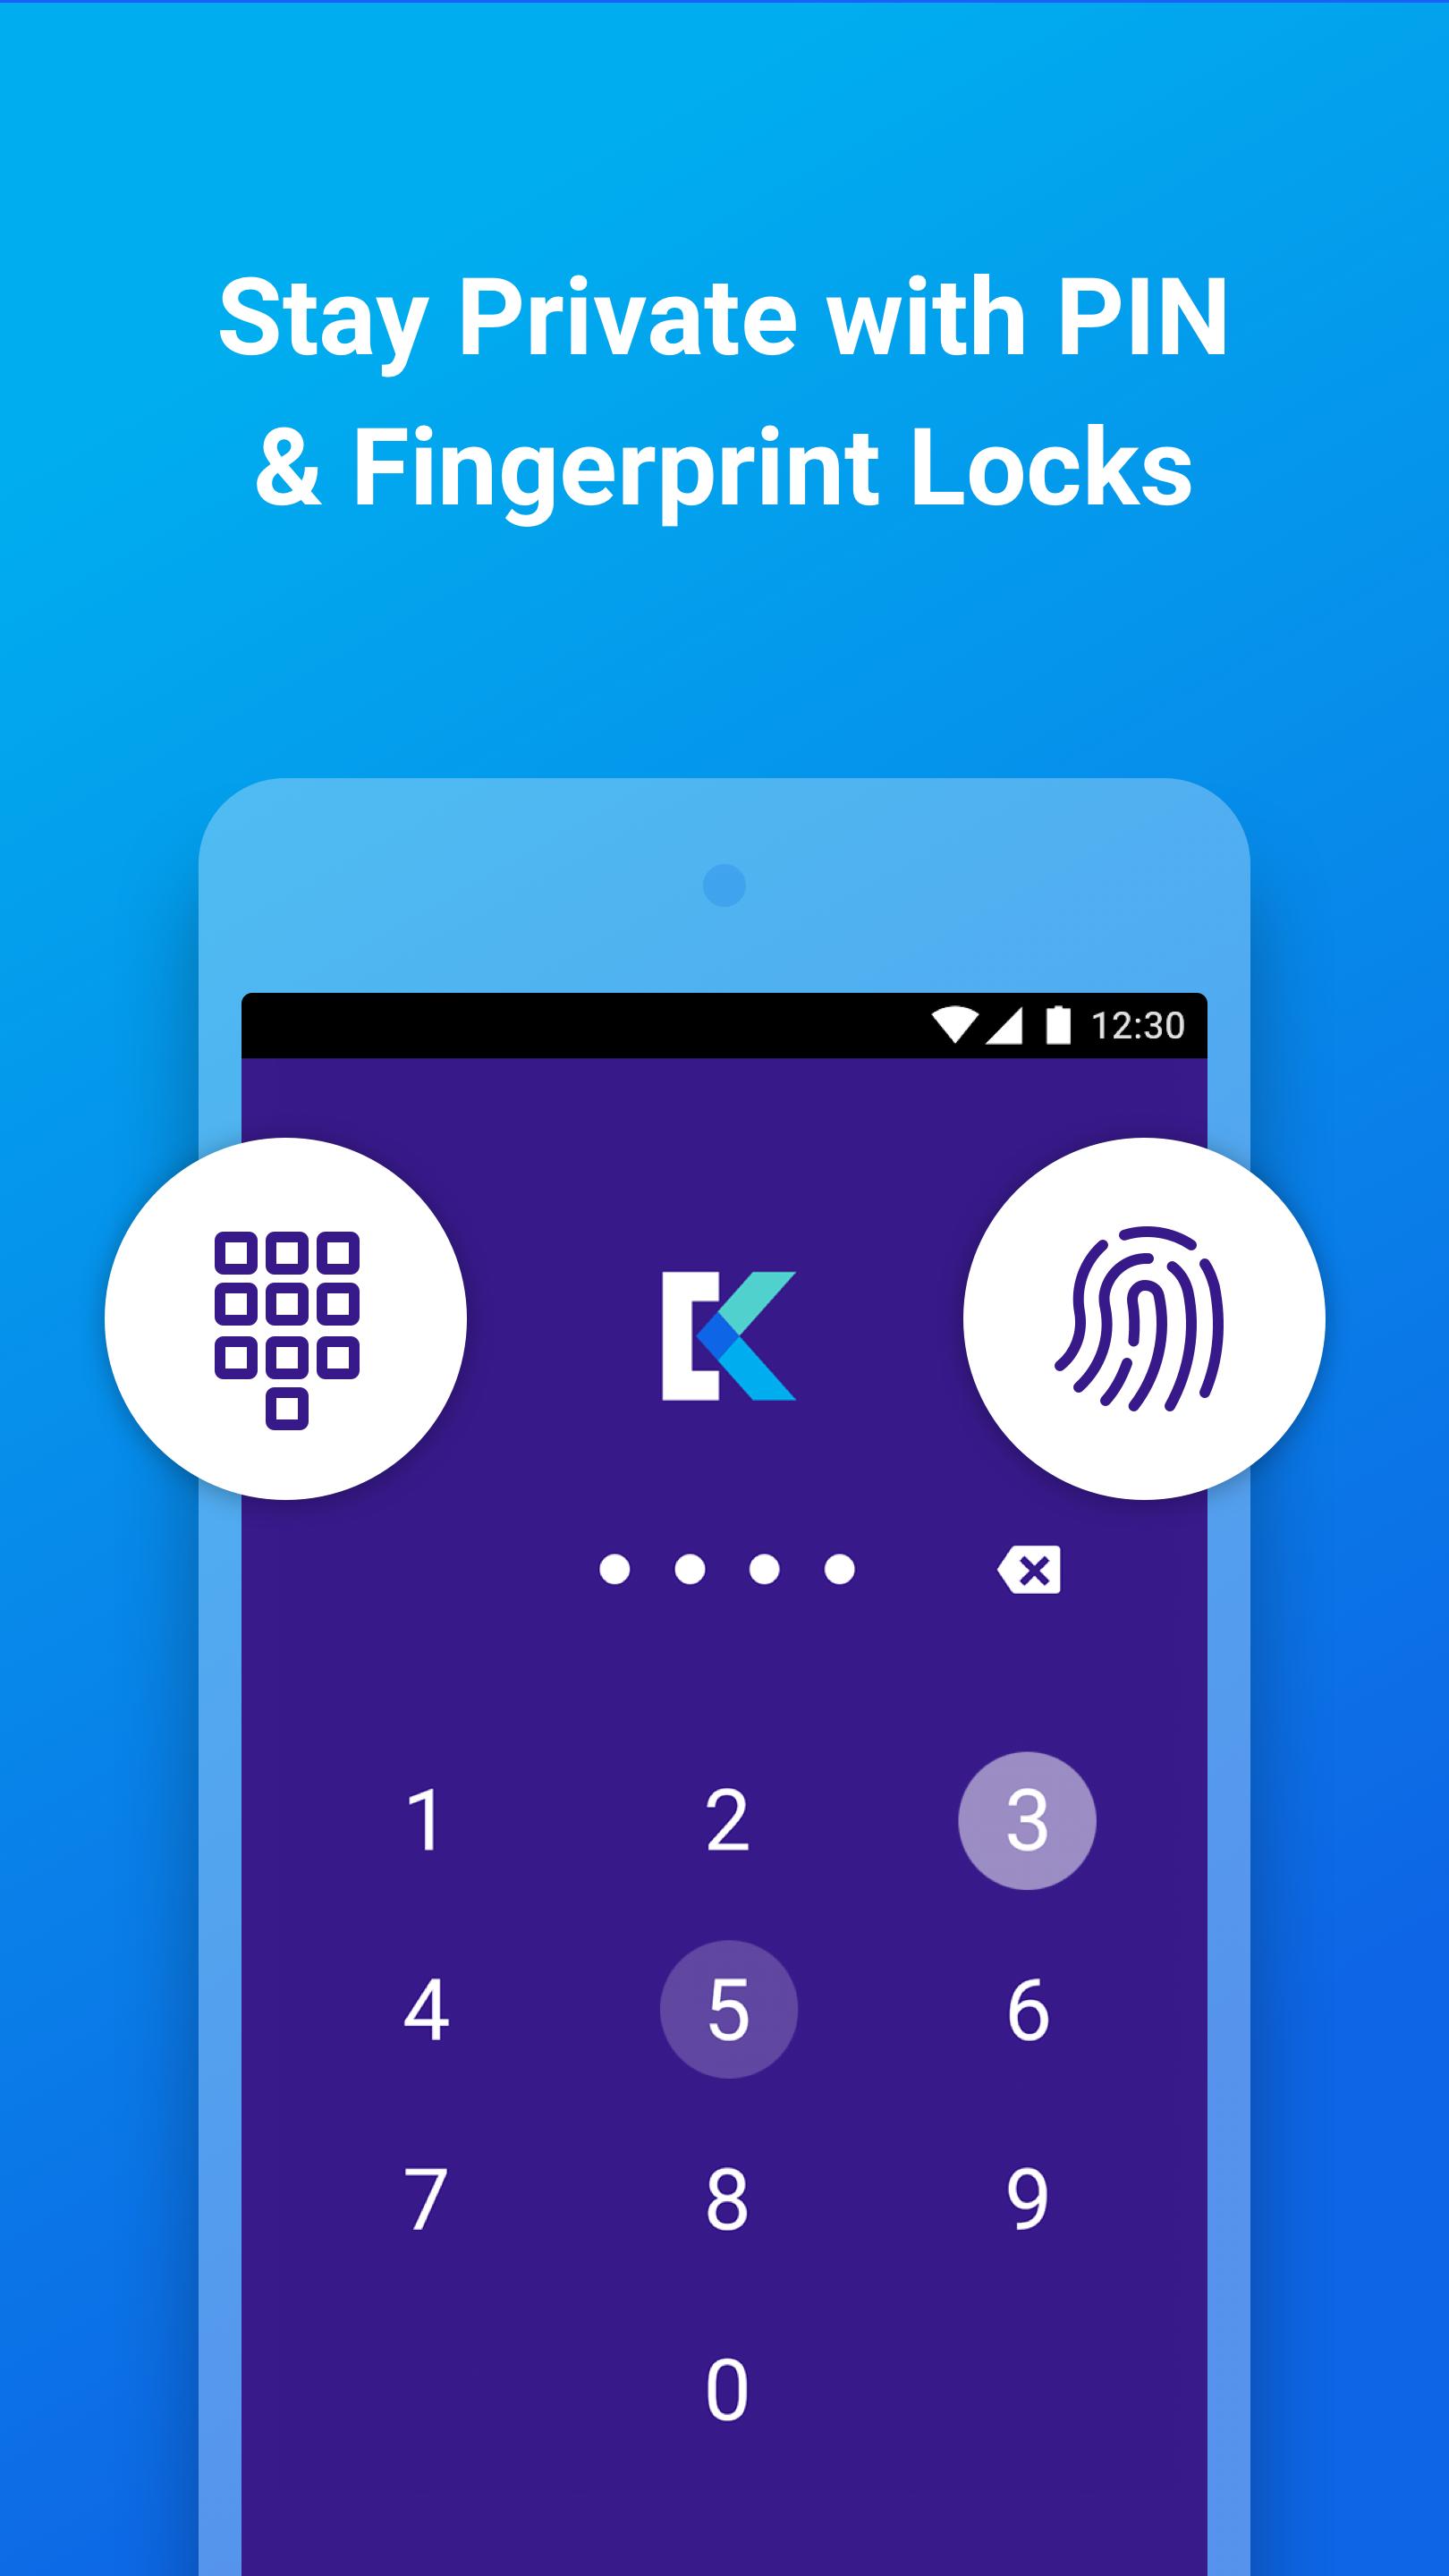 Keep safe apk for android free download windows 7